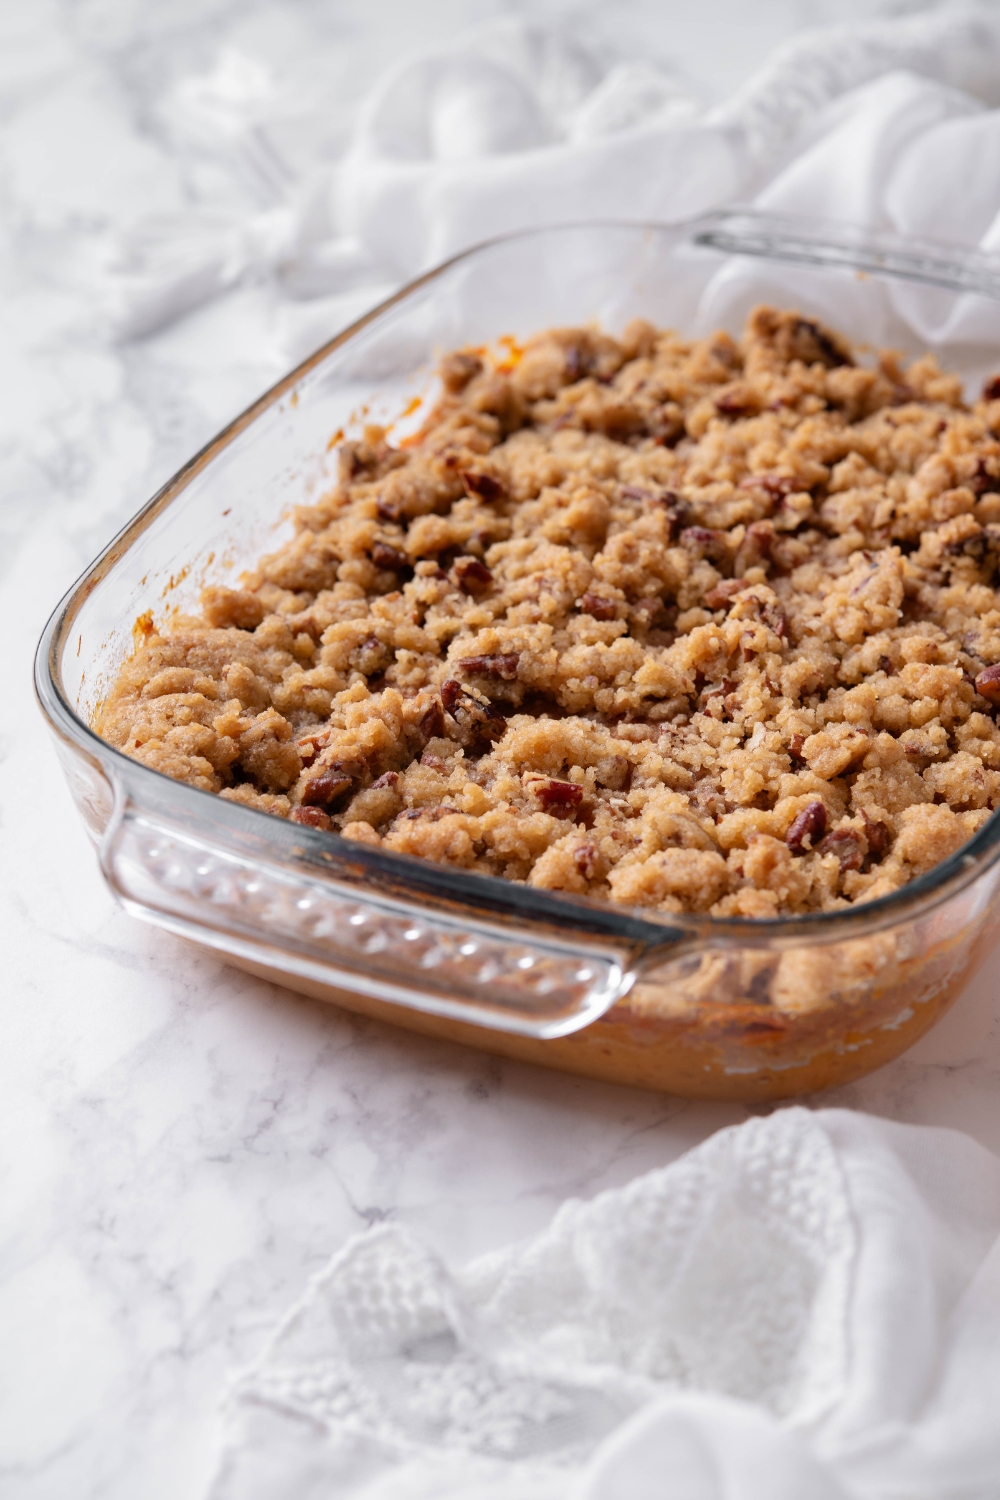 A clear baking dish filled with casserole covered in a pecan and brown sugar topping.